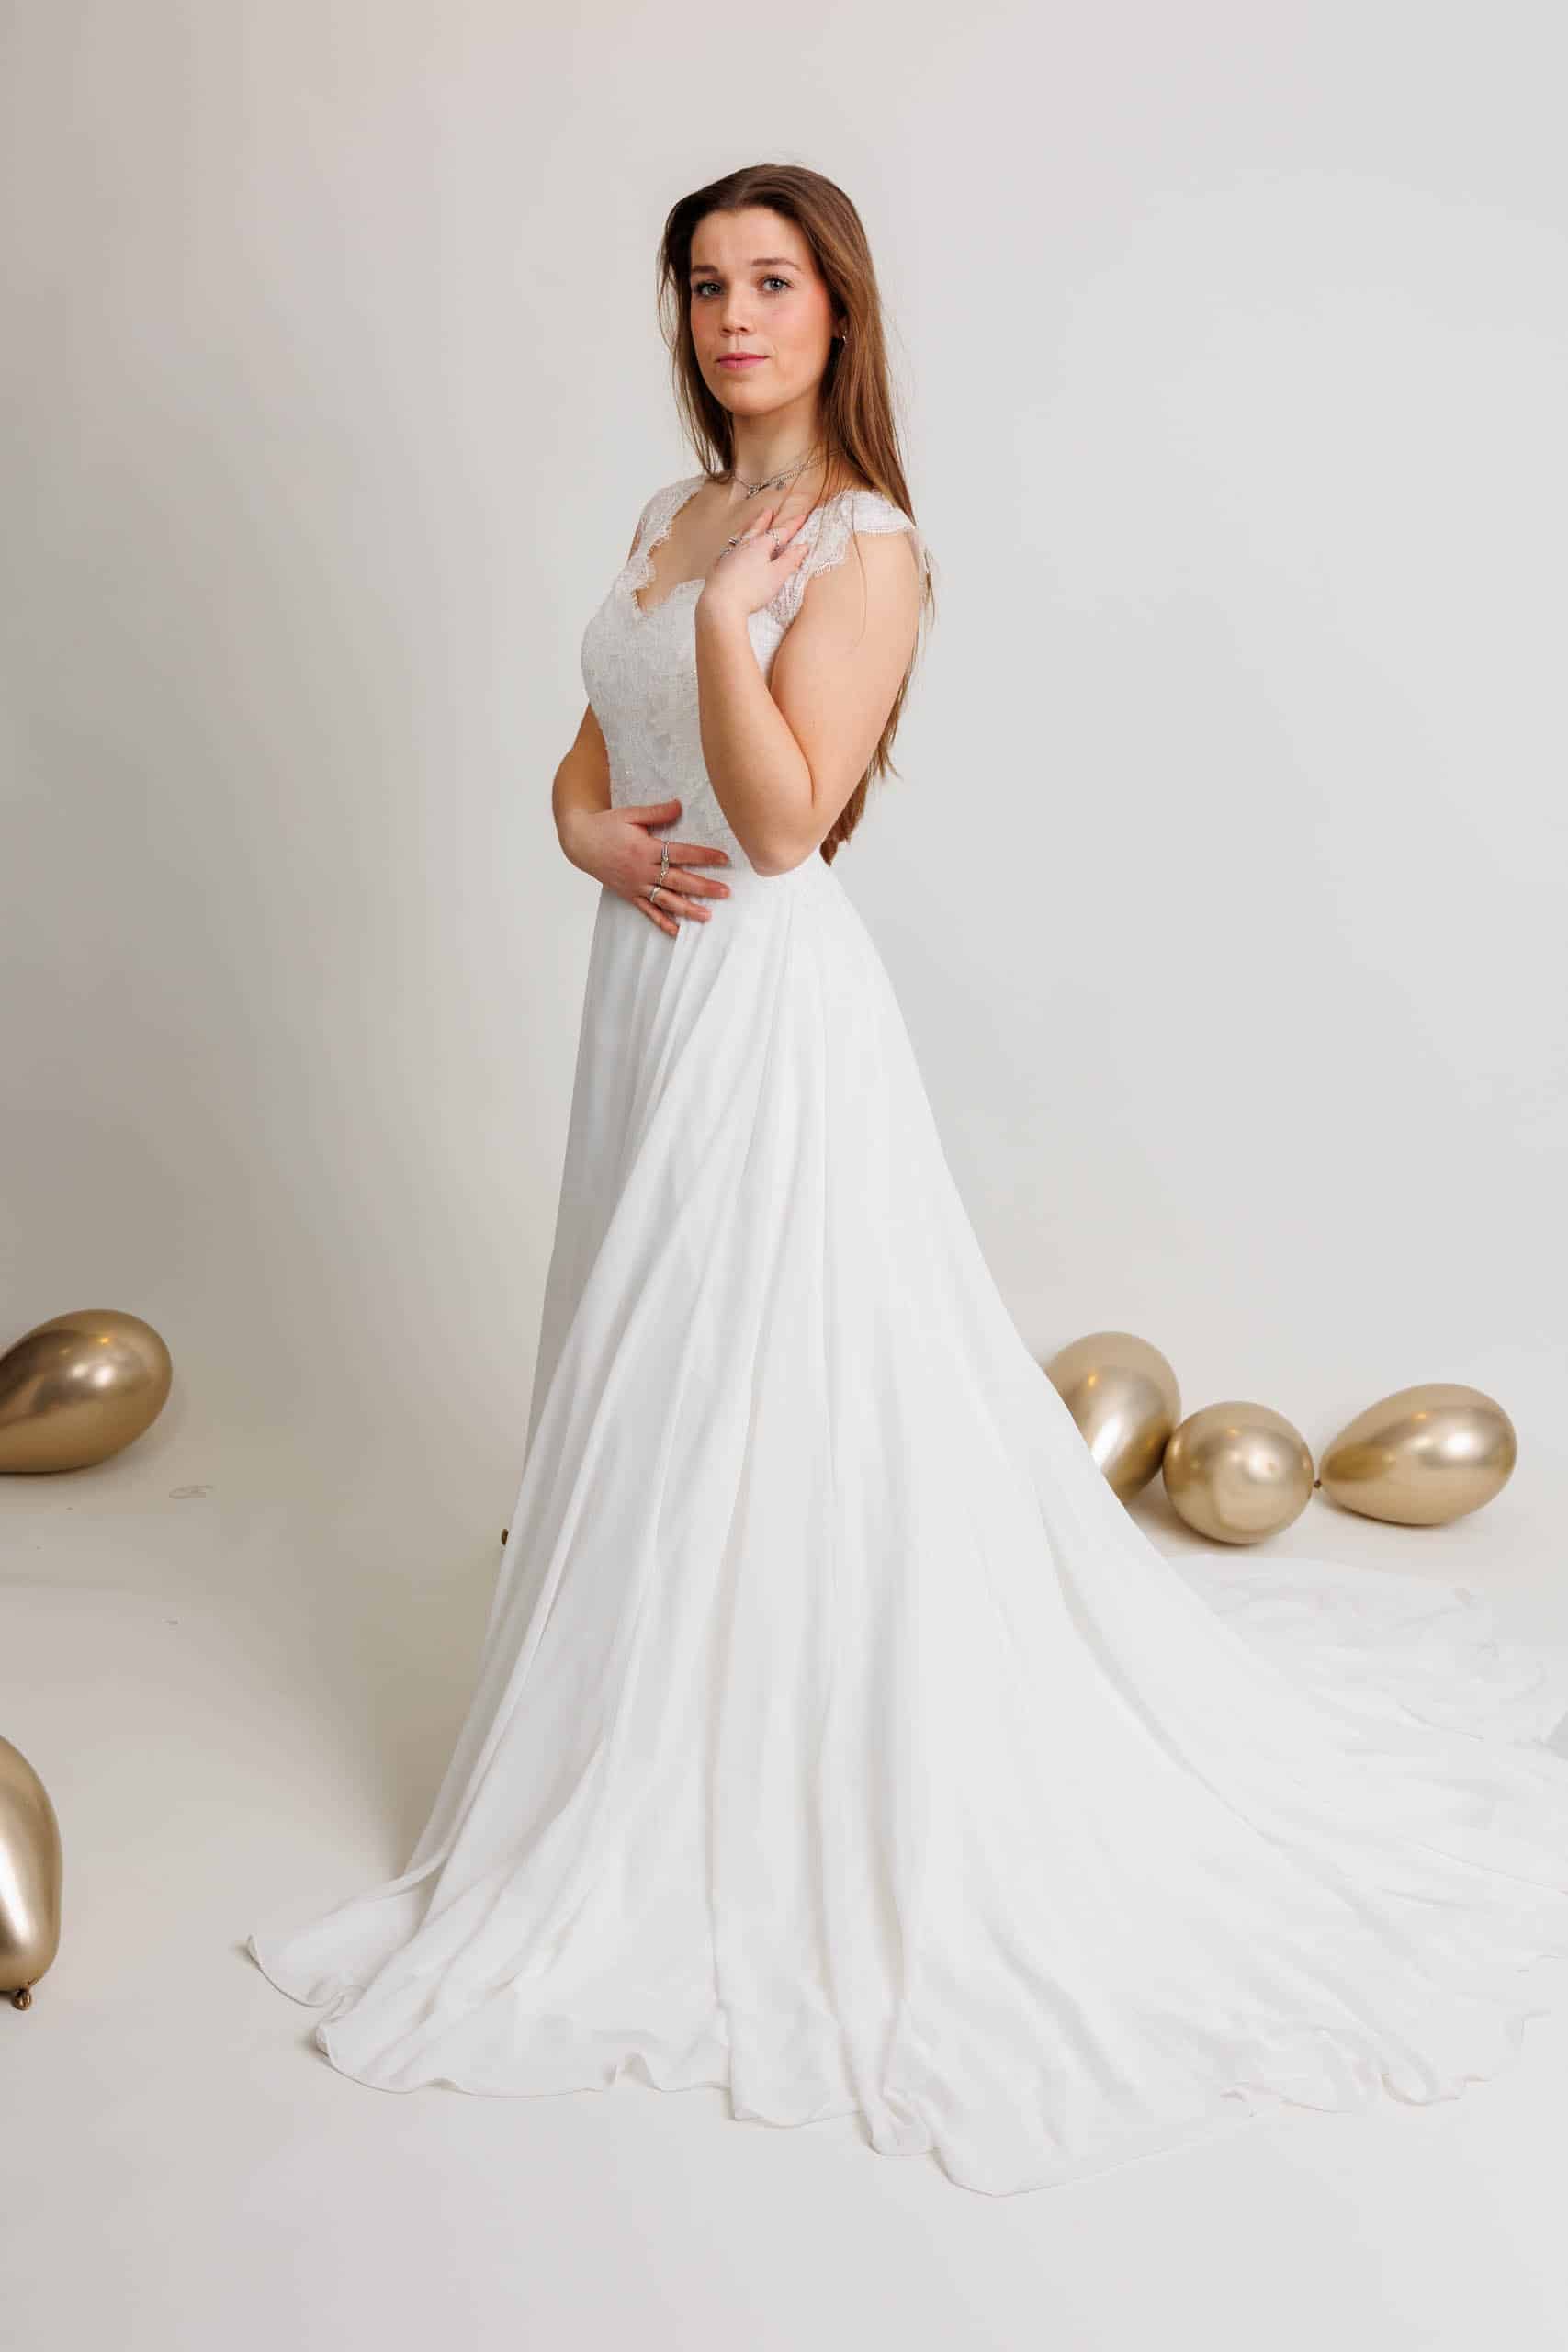 A woman in a white wedding dress poses with gold balloons while trying on wedding dresses for fun.